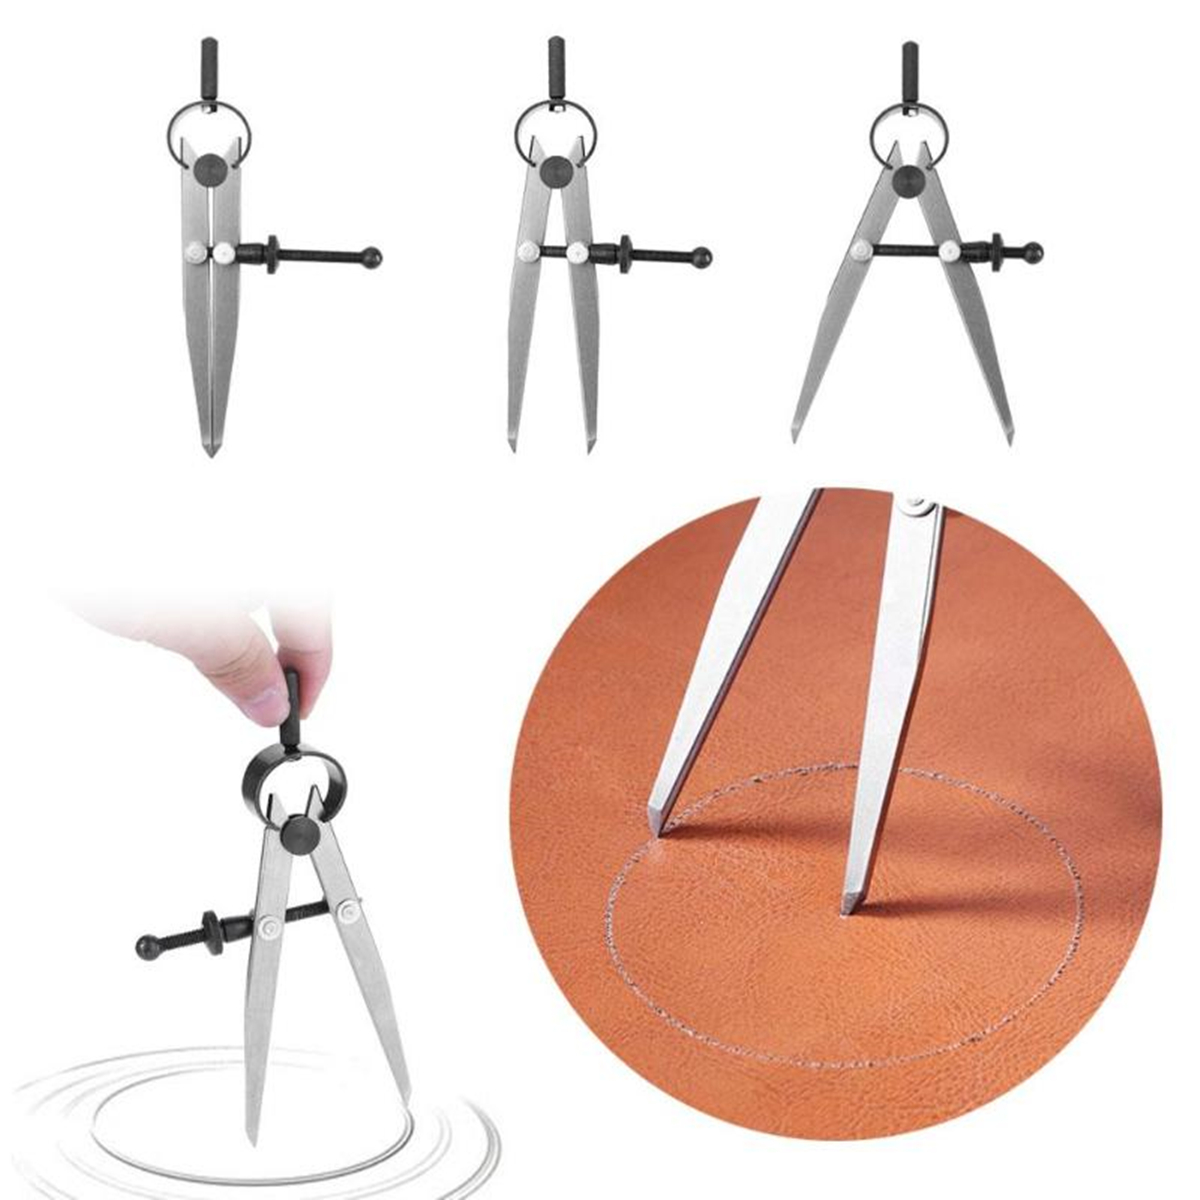 

Spacing Compass Wing Divider Rotating Scriber Edge Creaser Leather Drafting Tools Kit